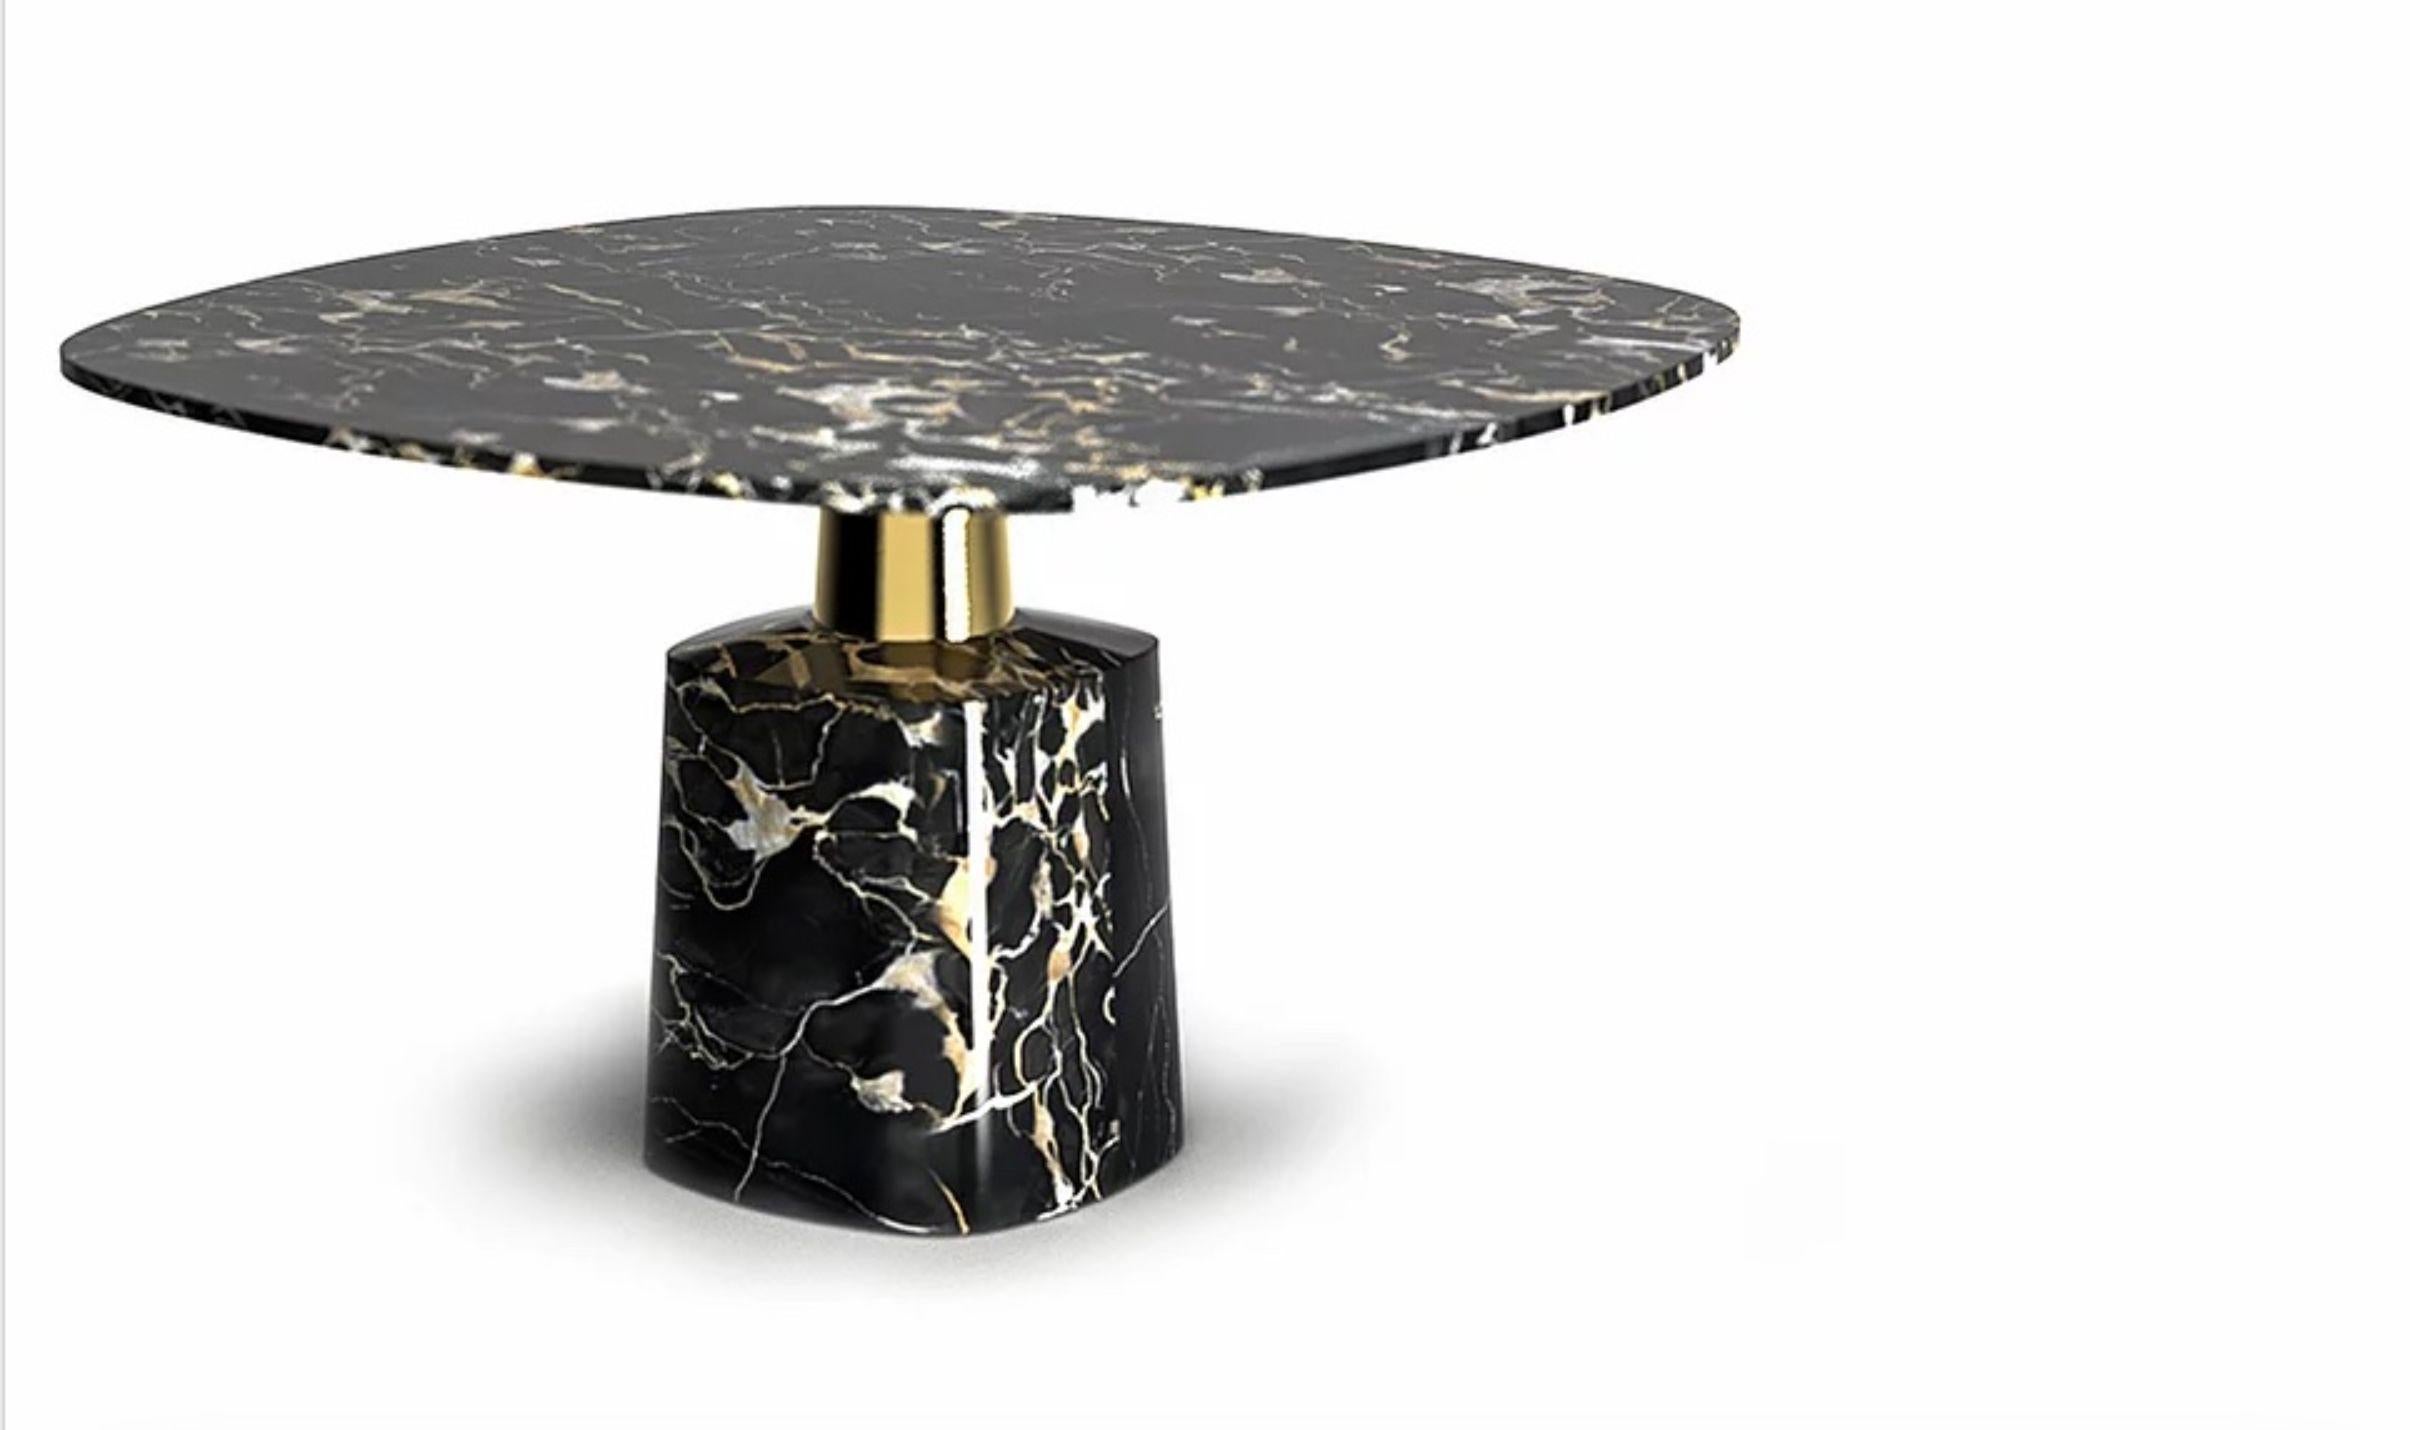 Cone marble dining table by Marmi Serafini
Materials: Marble and brass
Dimensions: 140 x 140 H80 cm

Elegant table defined by a clean and sophisticated lines stronlgy characterized by a metal leg that at the same time divides and still unify the